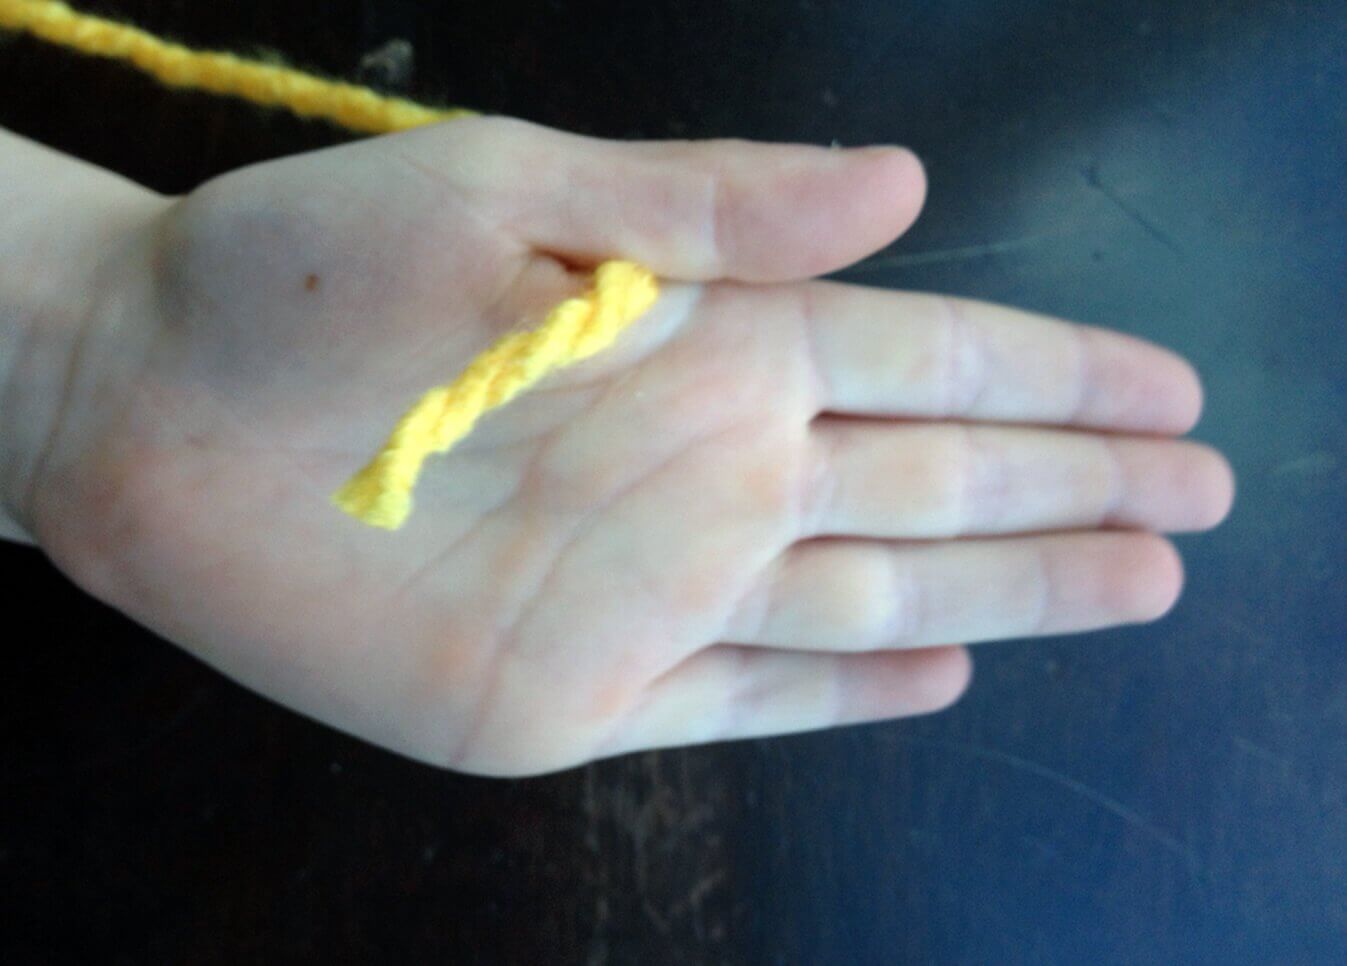 How to Finger Knit